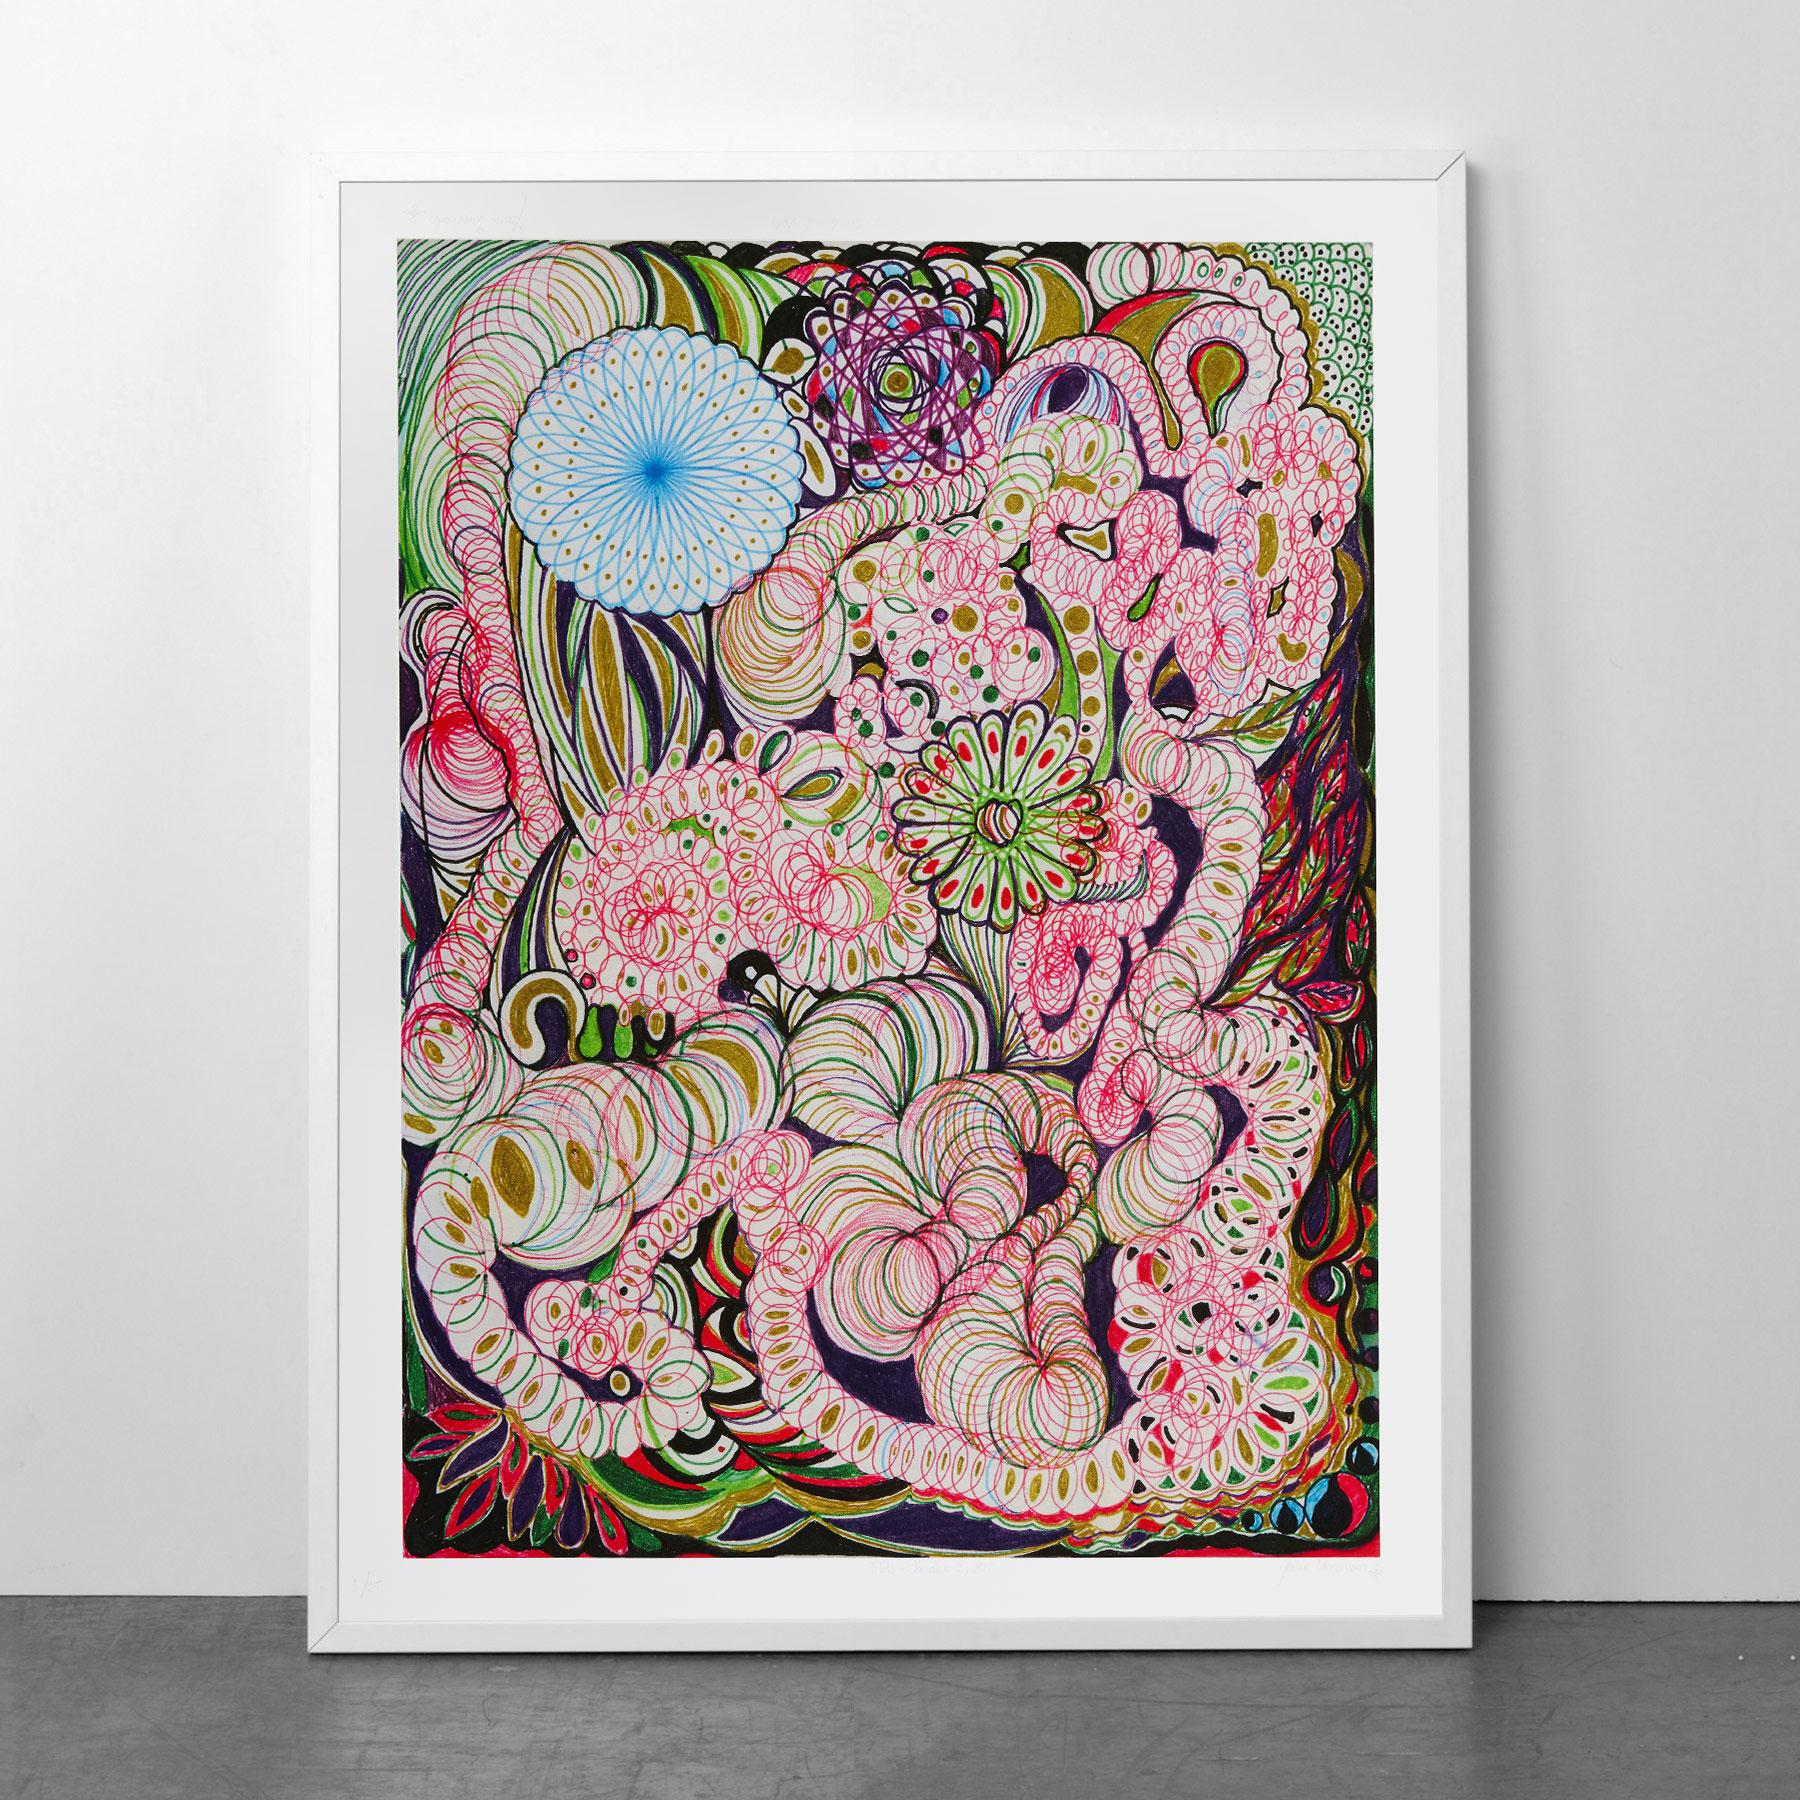 Joana Vasconcelos, Pandora II
Pandora II, Contemporary, 21st Century, Pigment Print, Limited Edition, Edition
Pigment Print
Edition of 25
111.7 x 86.1 cm (44 x 33.5 in)
Signed, numbered and titled accompanied by Certificate of Authenticity
In mint